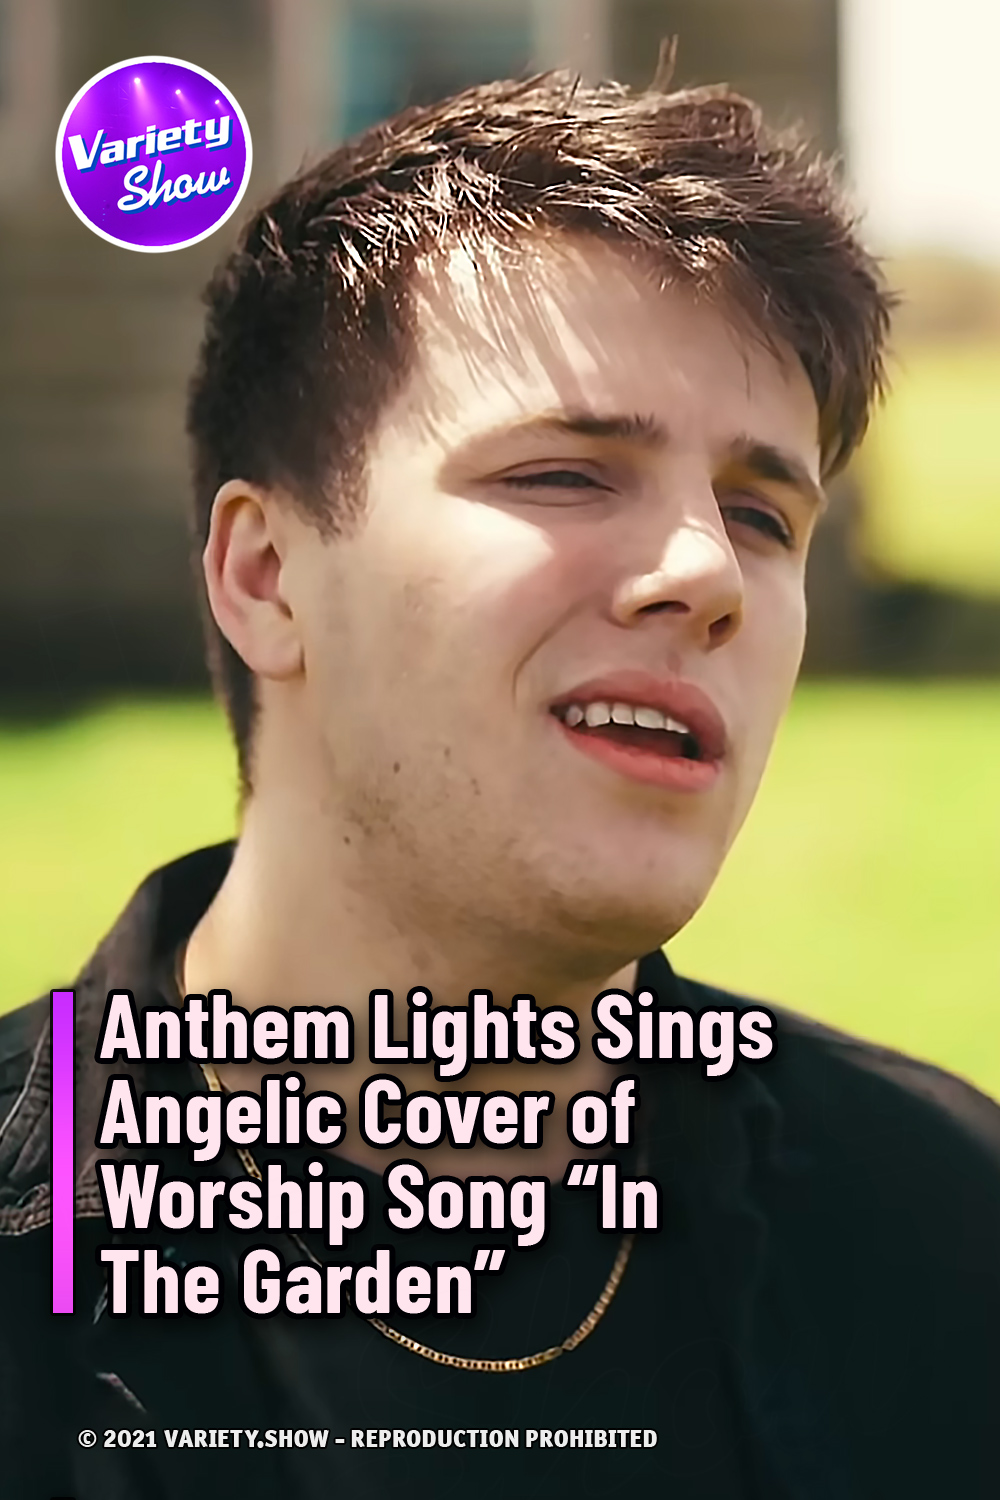 Anthem Lights Sings Angelic Cover of Worship Song “In The Garden”